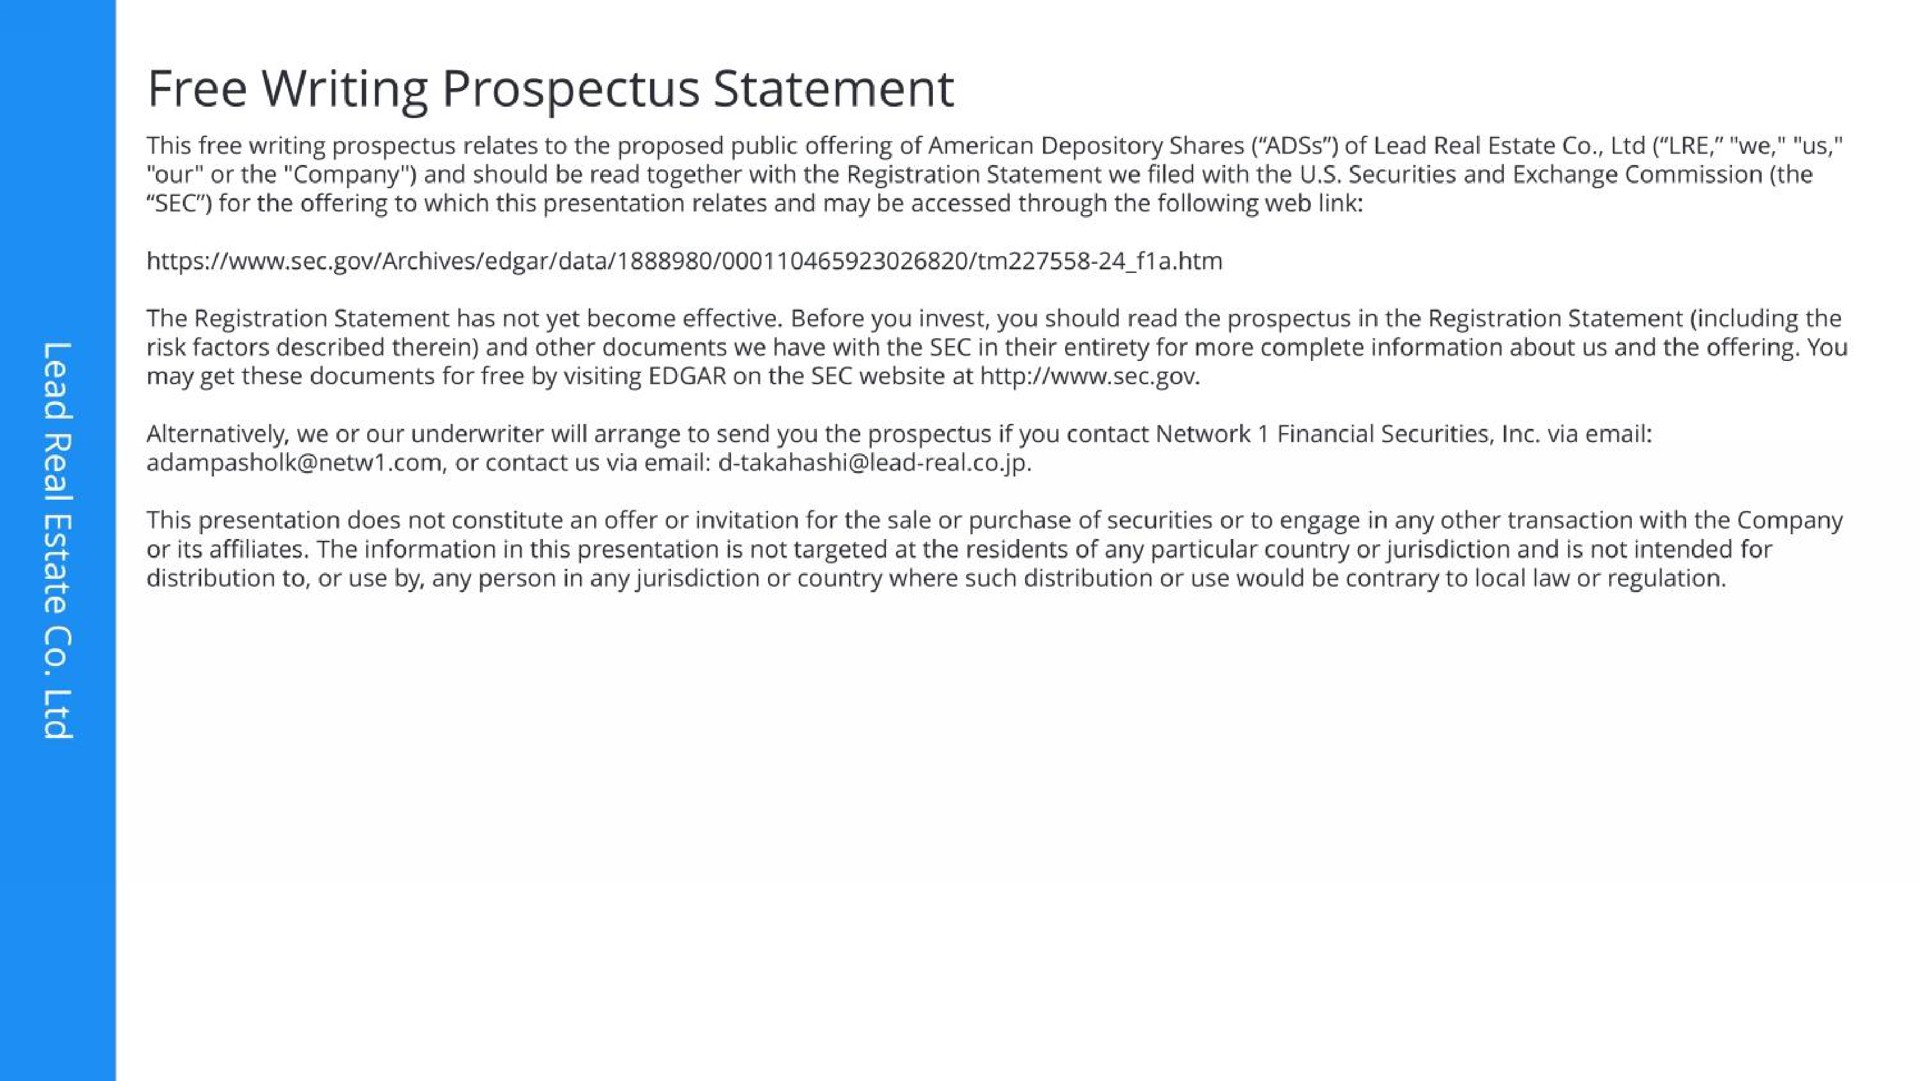 free writing prospectus statement | Lead Real Estate Co